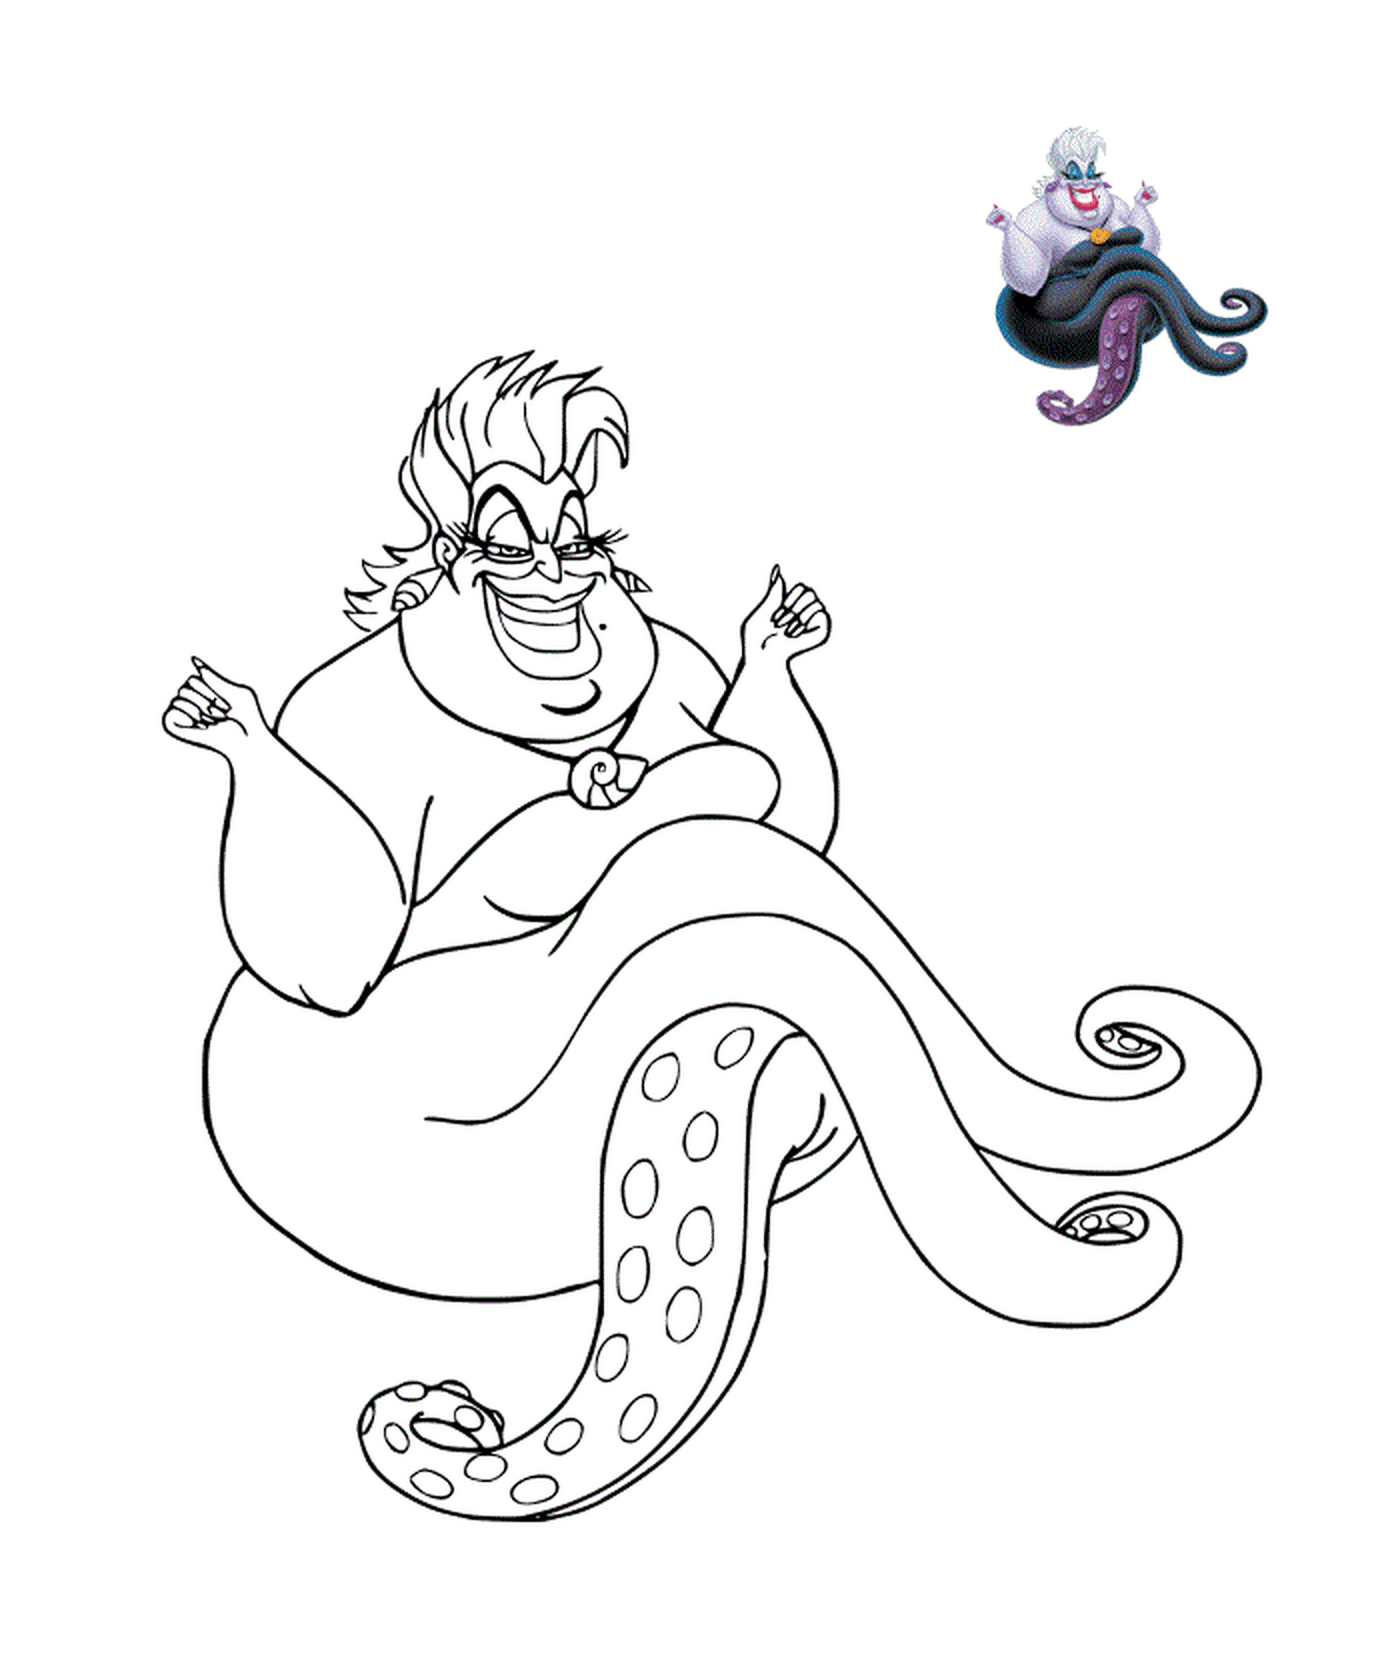  Ursula, the witch of the seas 